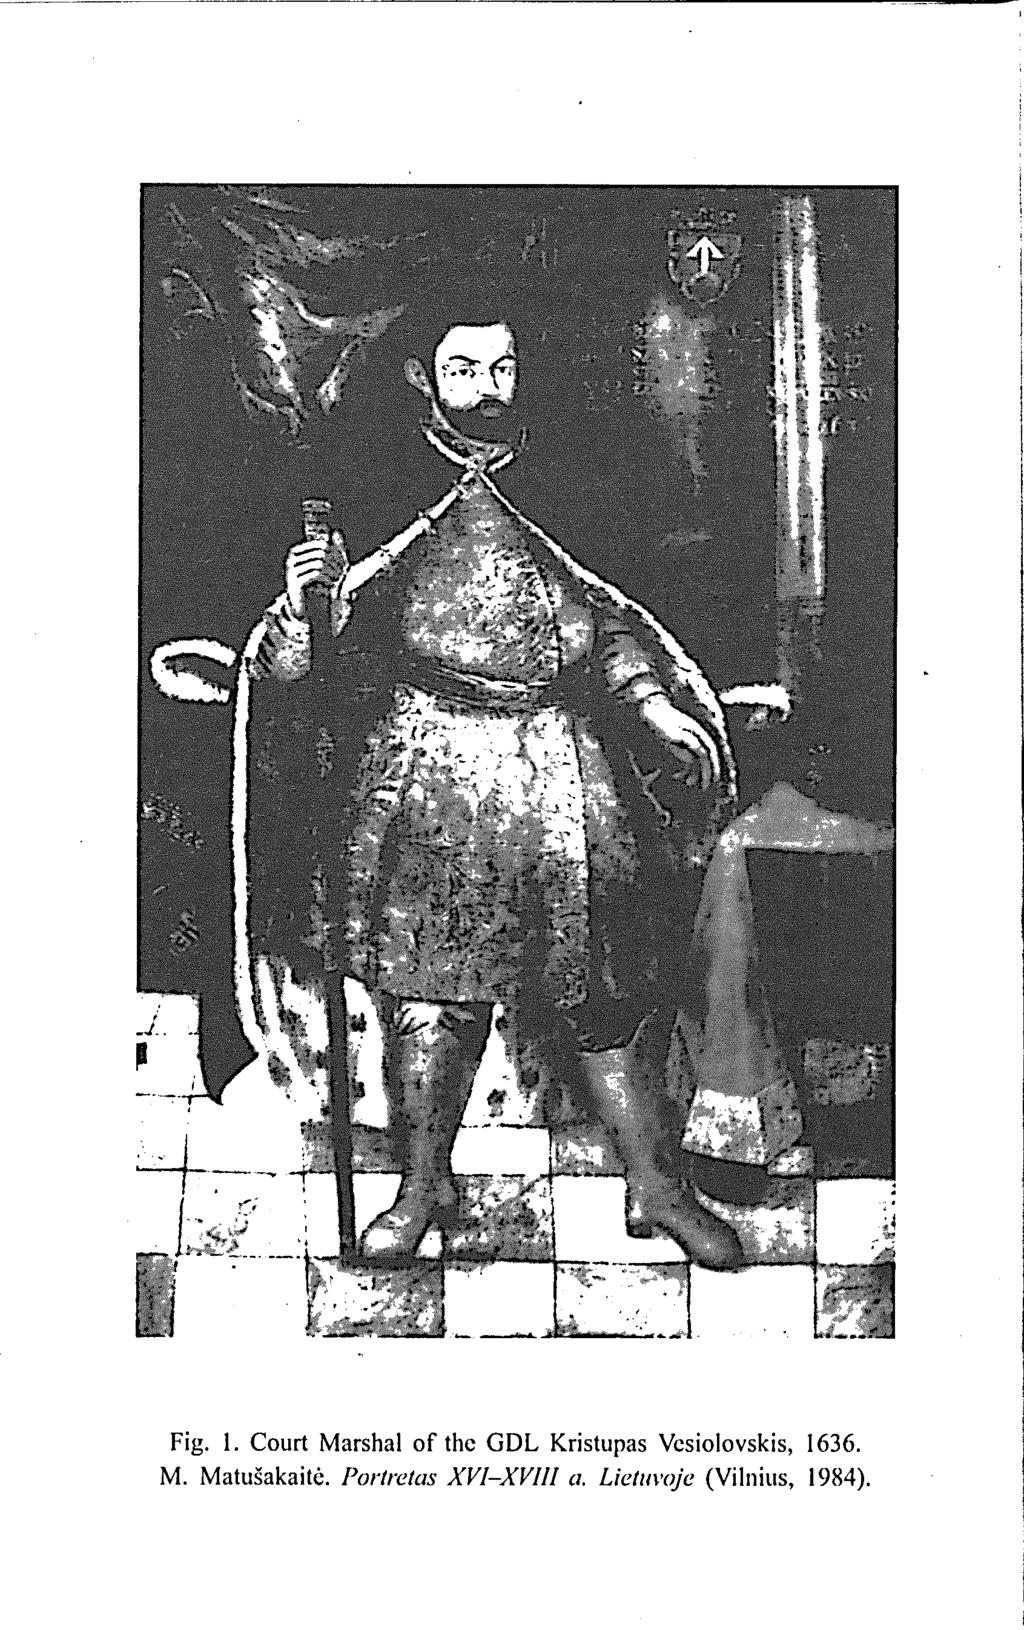 Fig. 1. Court Marshal of the GDL Kristupas Vcsiolovskis, 1636.